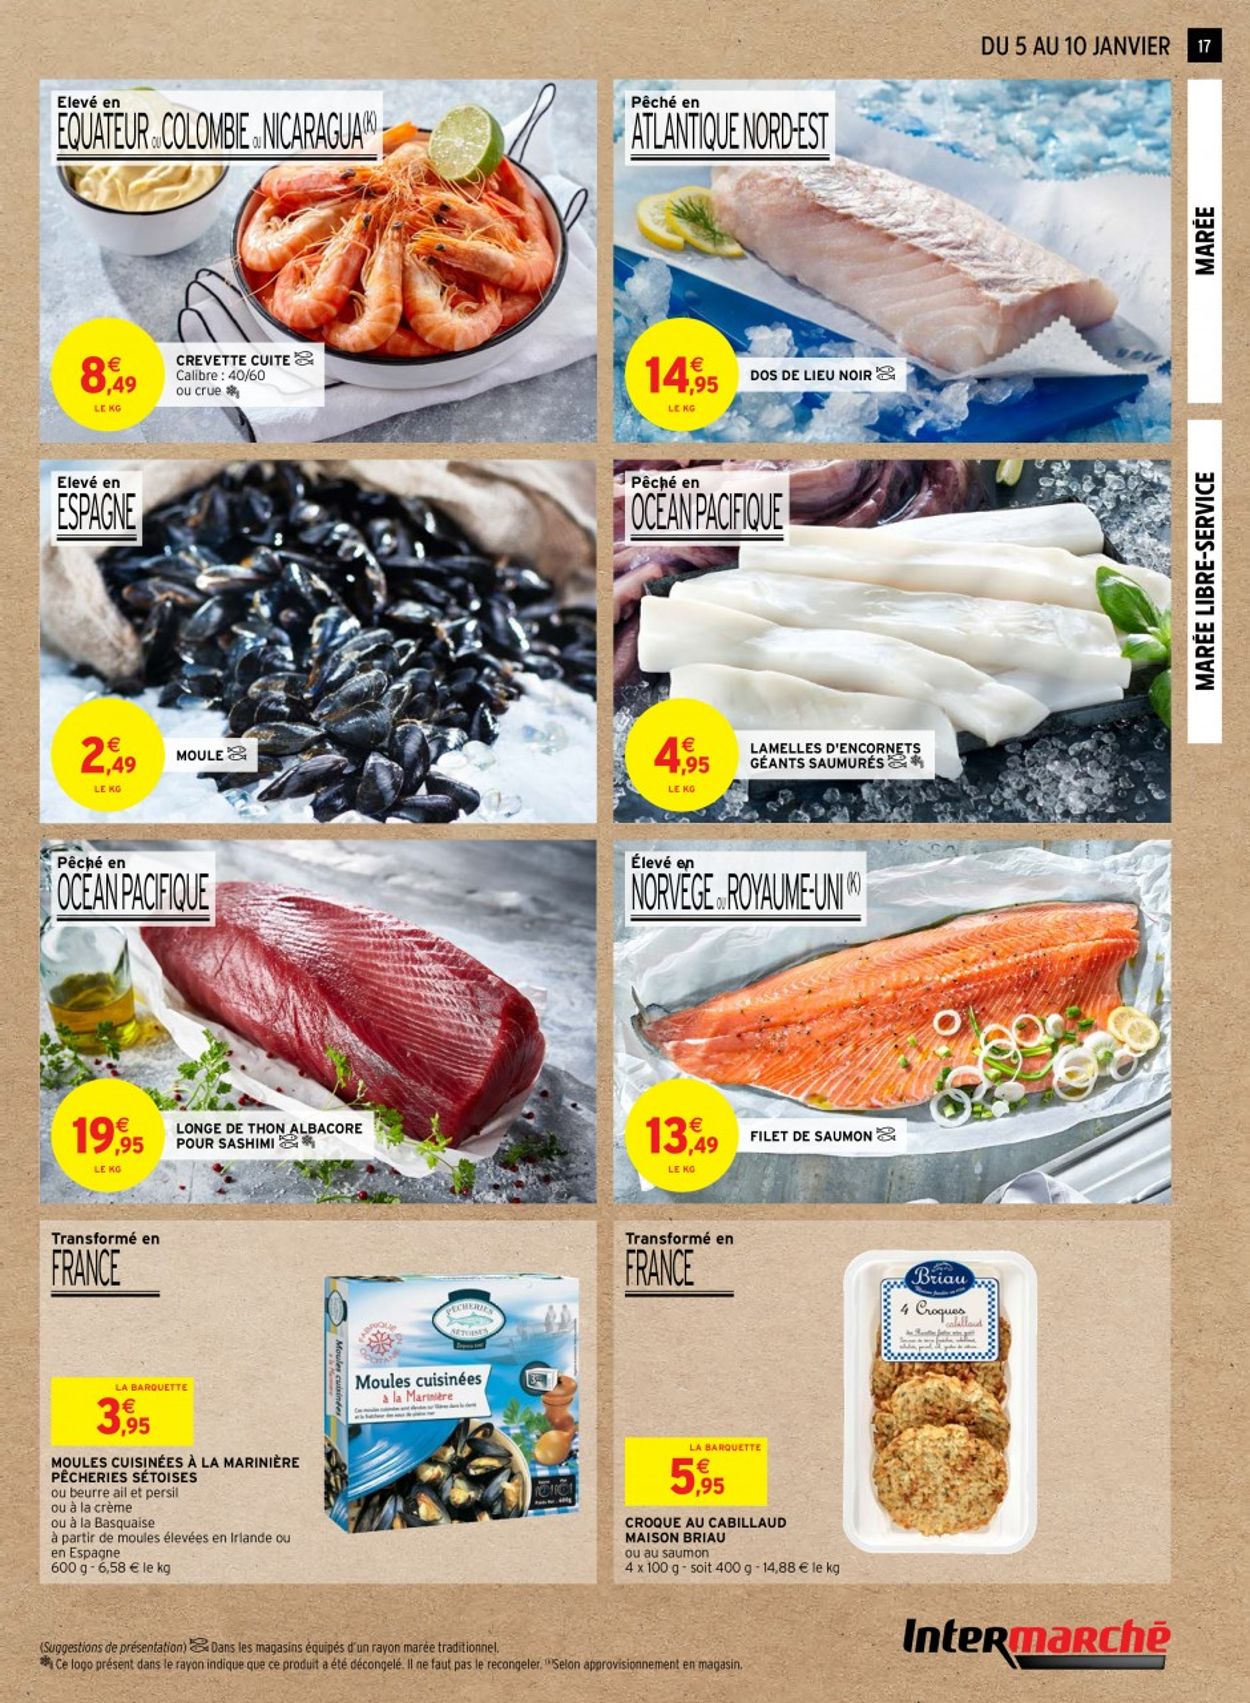 Intermarché Special Choucroute 2021 Catalogue - 05.01-10.01.2021 (Page 17)